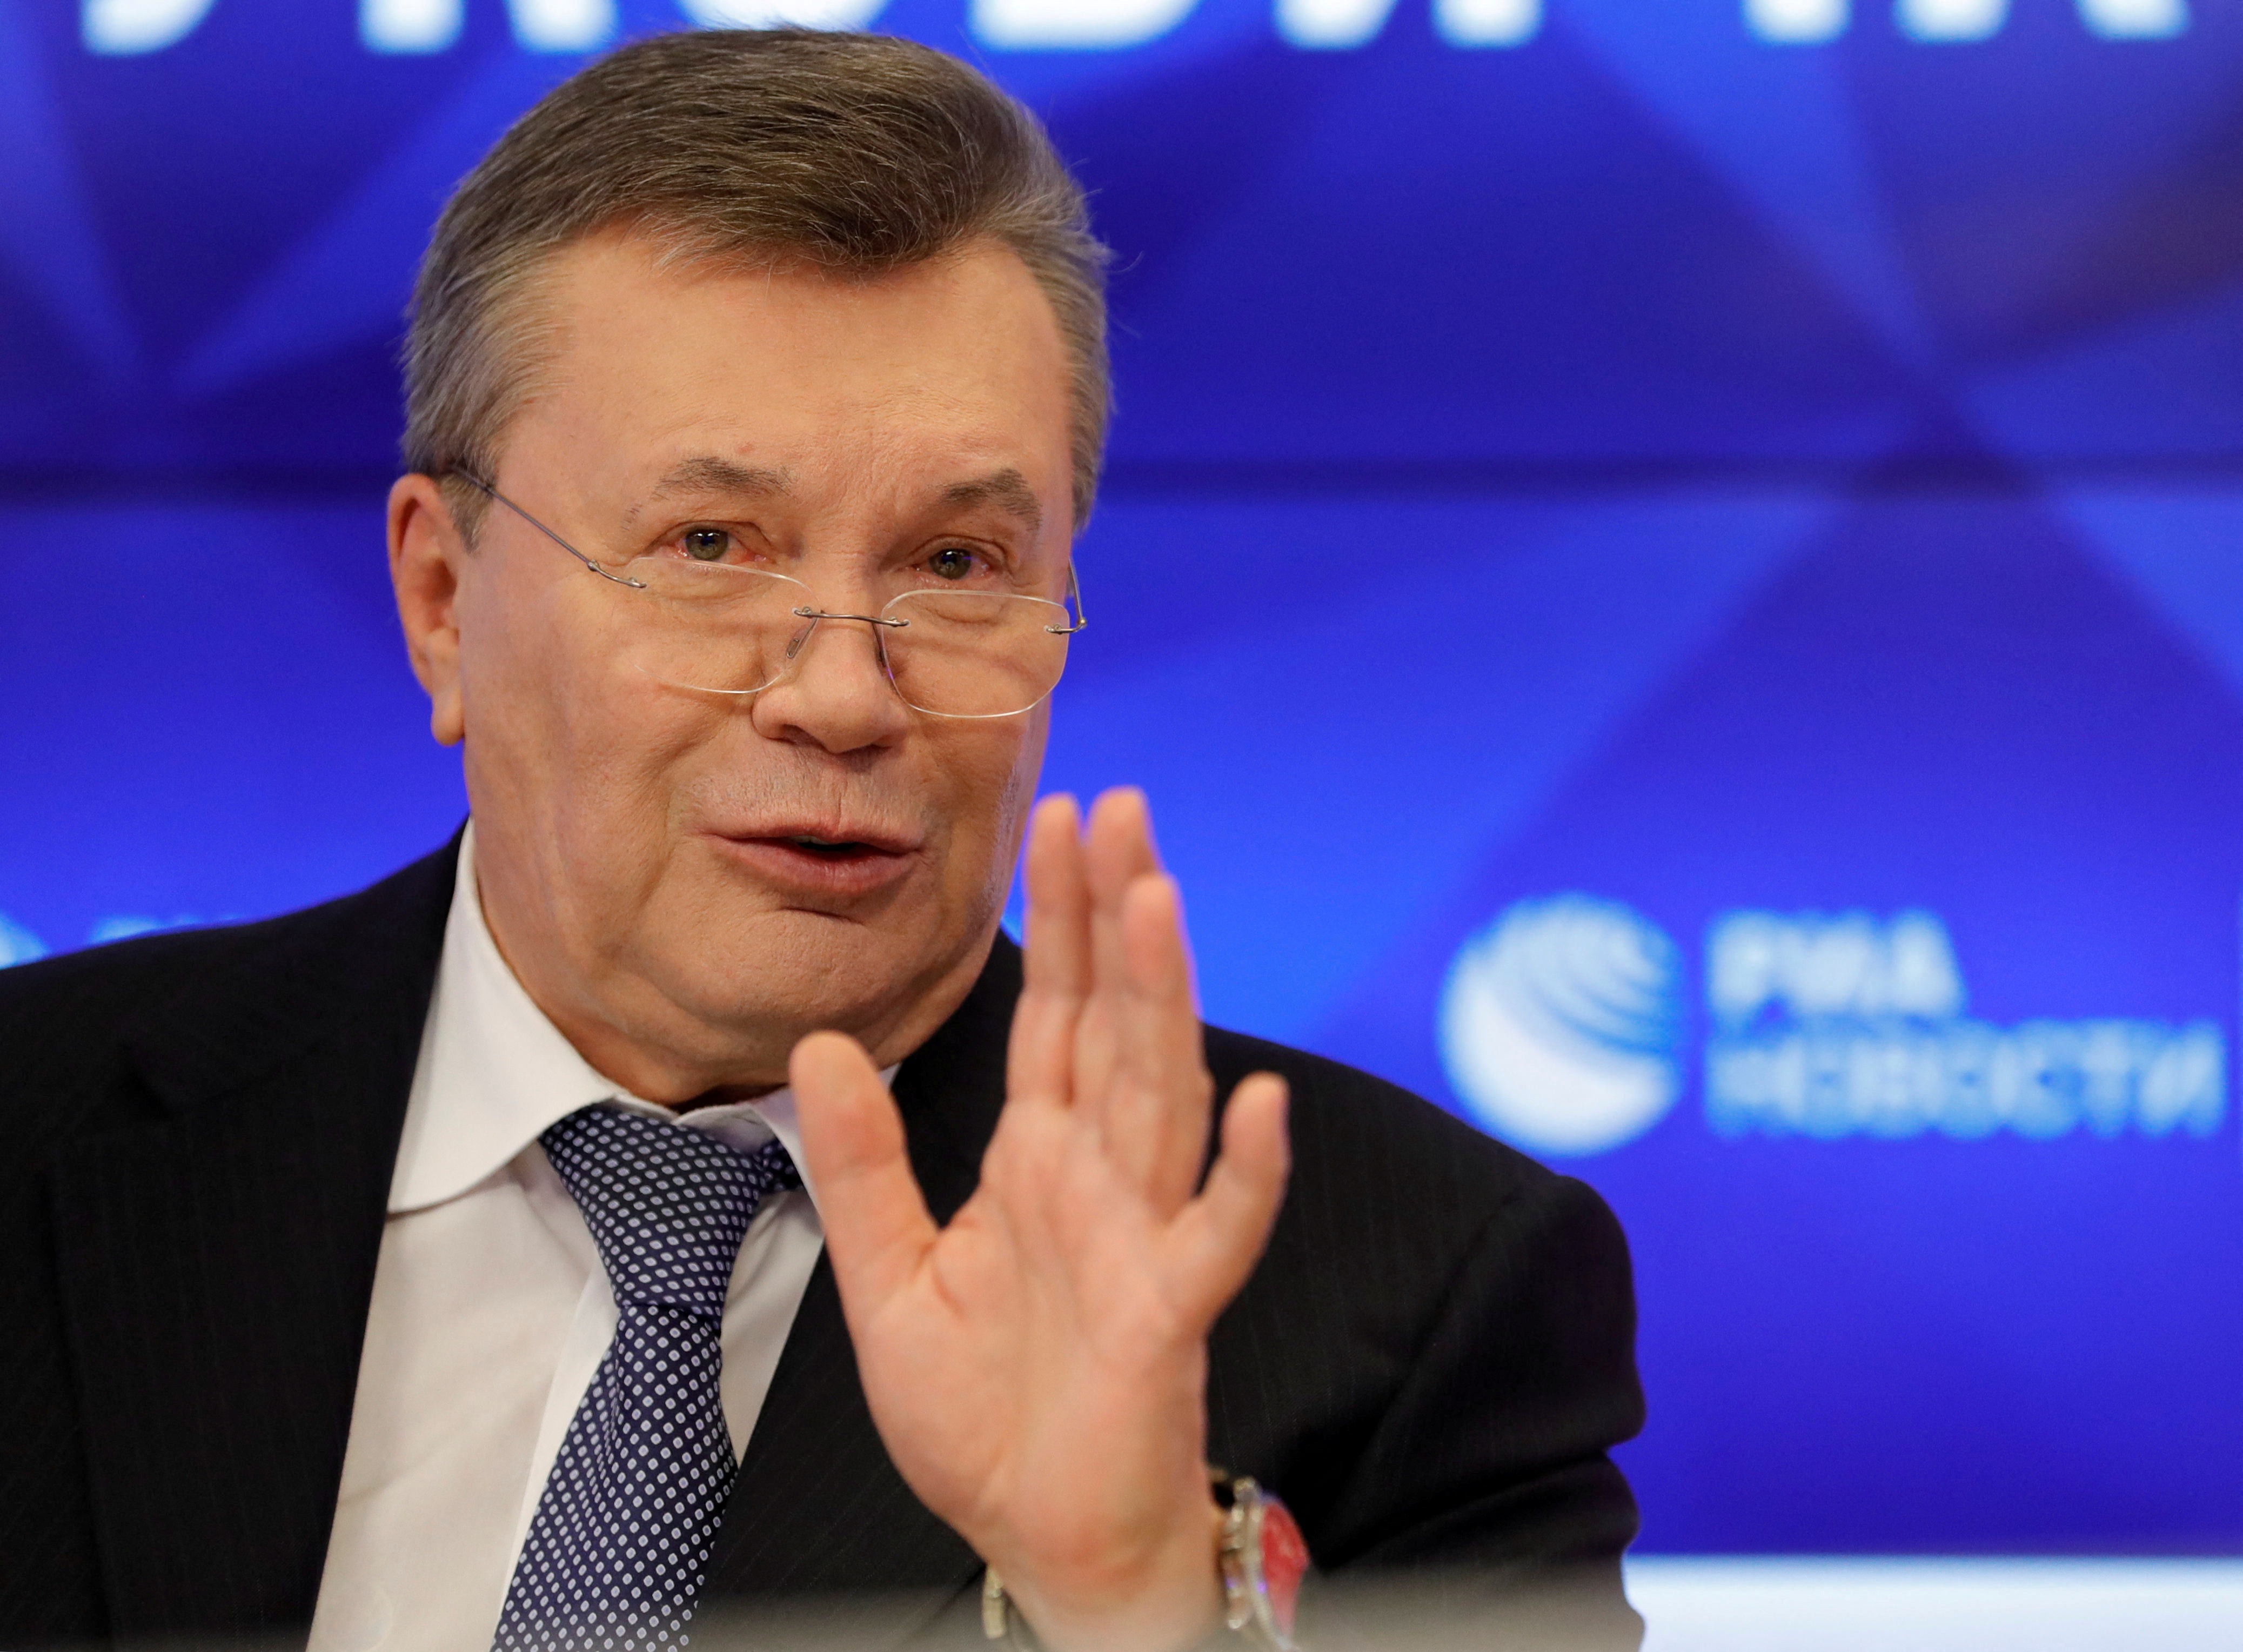 Viktor Yanukovich, the former president of Ukraine speaks during a news conference in Moscow